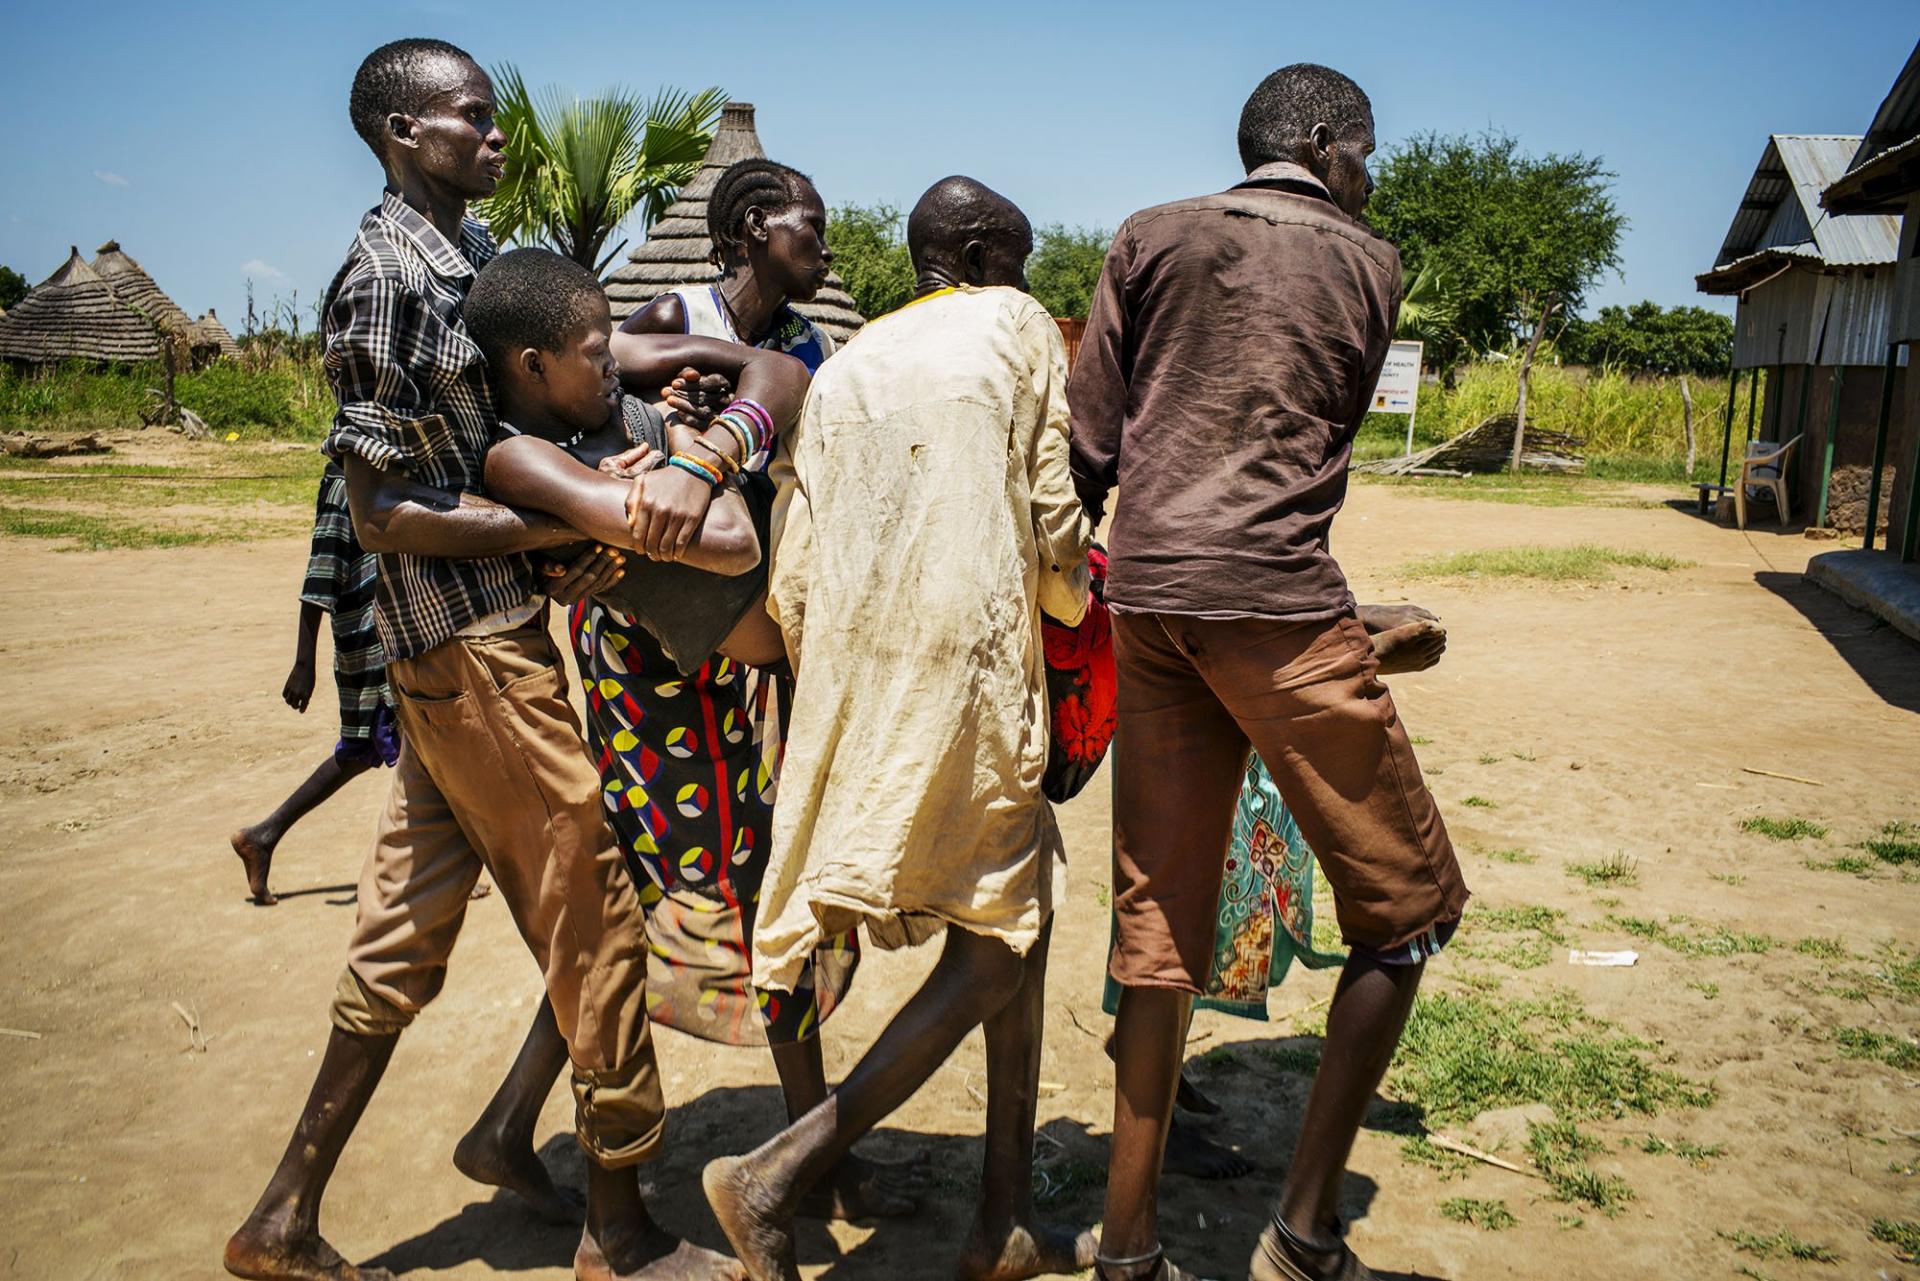 South Sudan marks two years of conflict since fighting broke out in